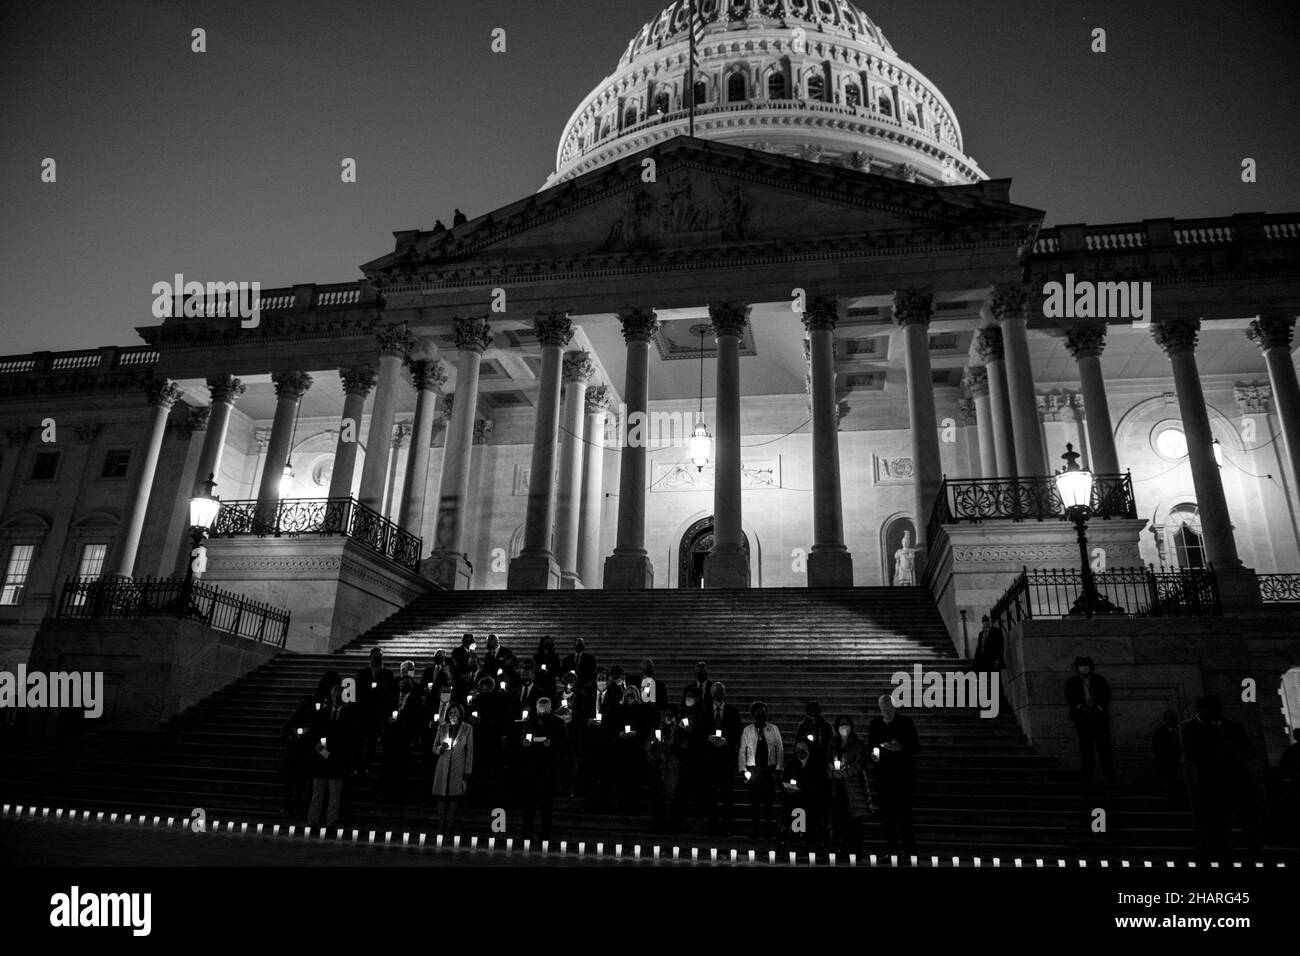 Washington, United States Of America. 14th Dec, 2021. Congressional Leaders, and bipartisan members of House and Senate arrive for a Moment of Silence for the 800,000 American Lives Lost to COVID-19, at the US Capitol in Washington, DC, Tuesday, December 14, 2021. Credit: Rod Lamkey/CNP/Sipa USA Credit: Sipa USA/Alamy Live News Stock Photo